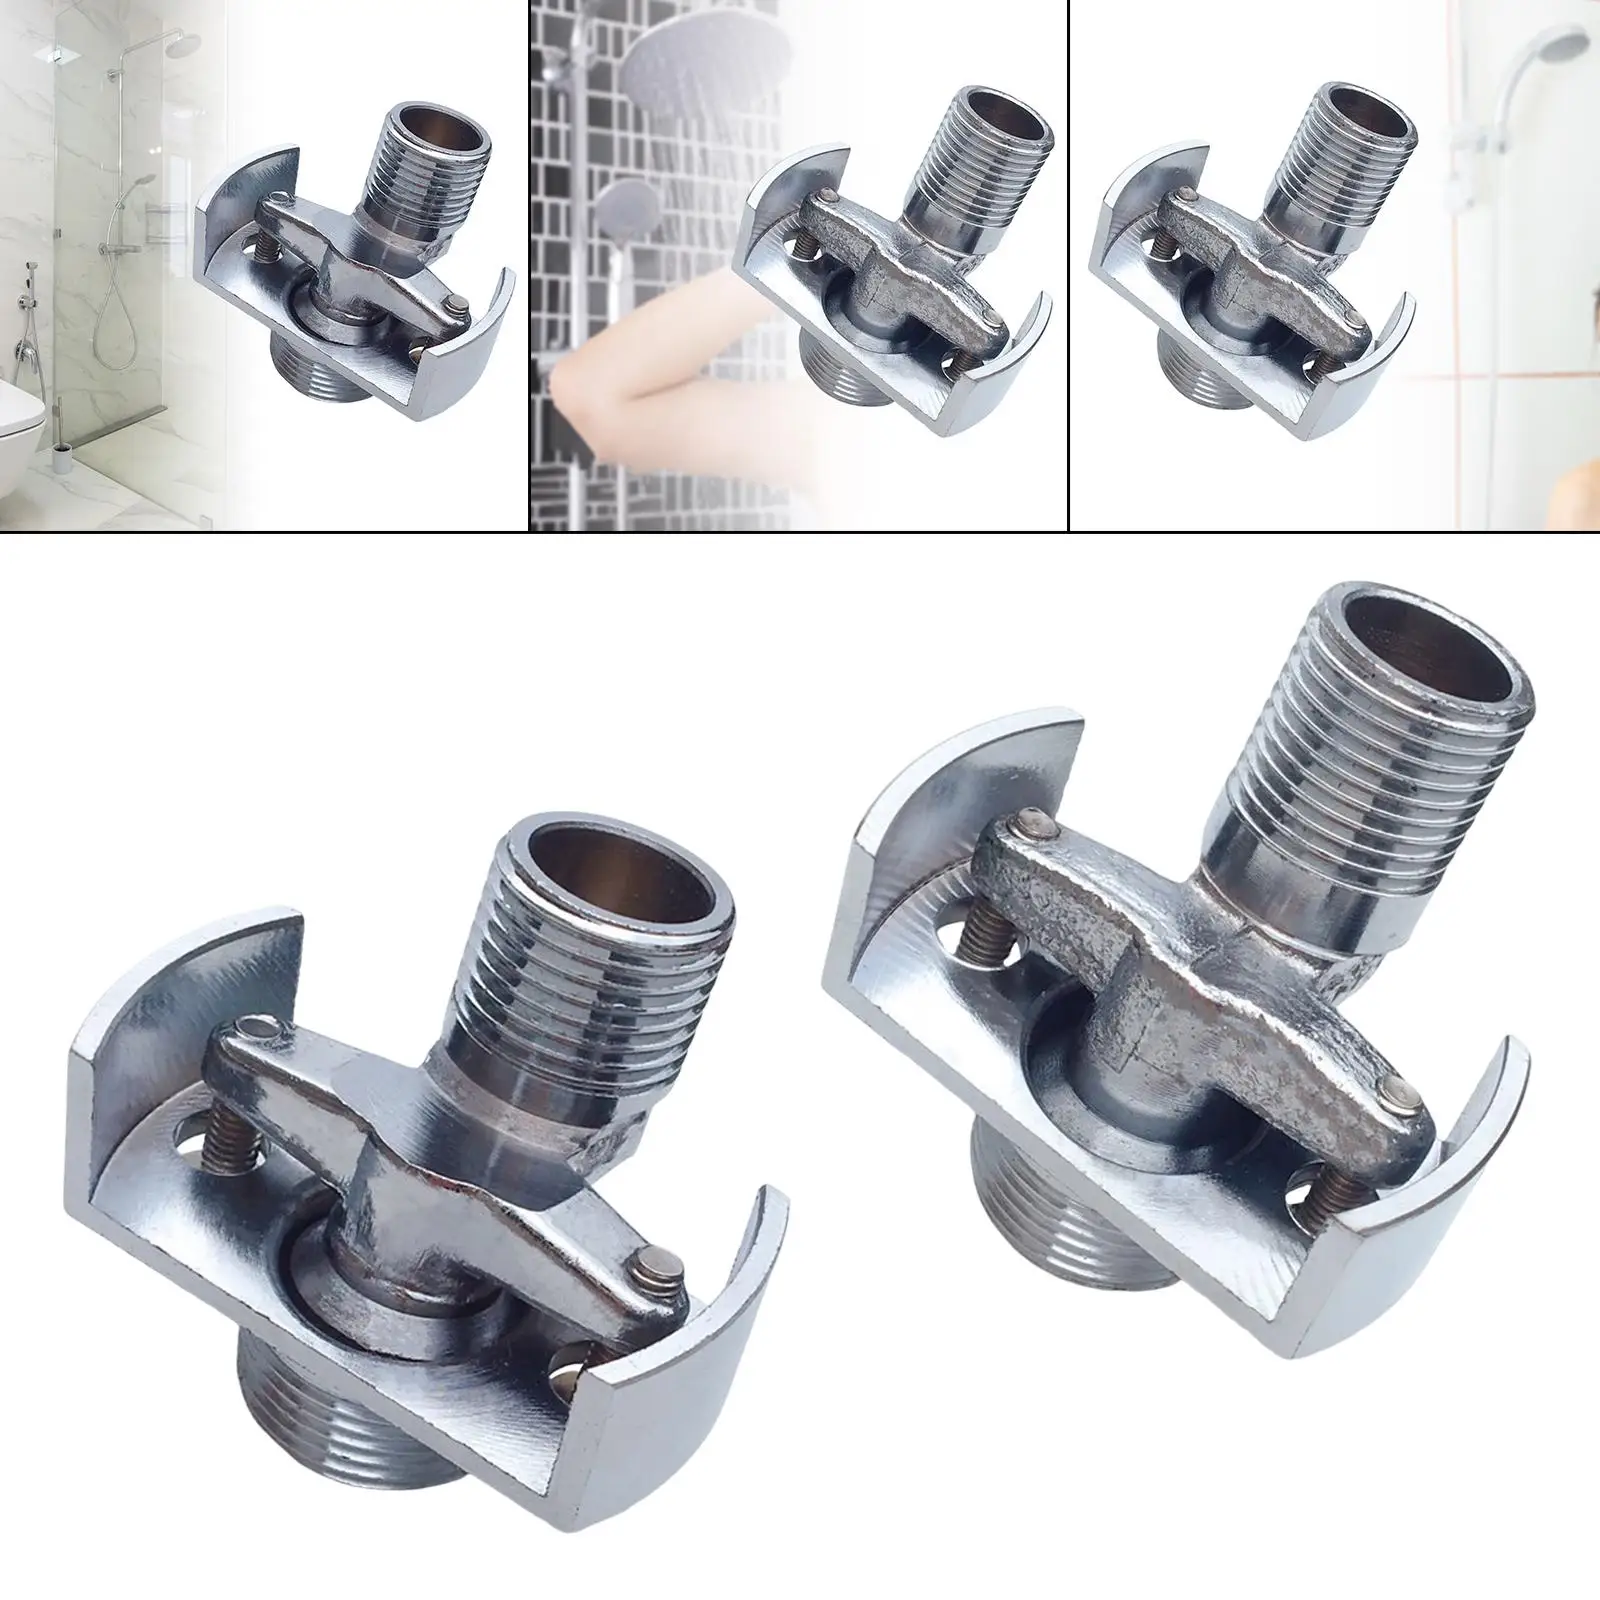 Shower Faucet Adapter Adjustable Angle Wall Mounted Copper for Bathroom Household